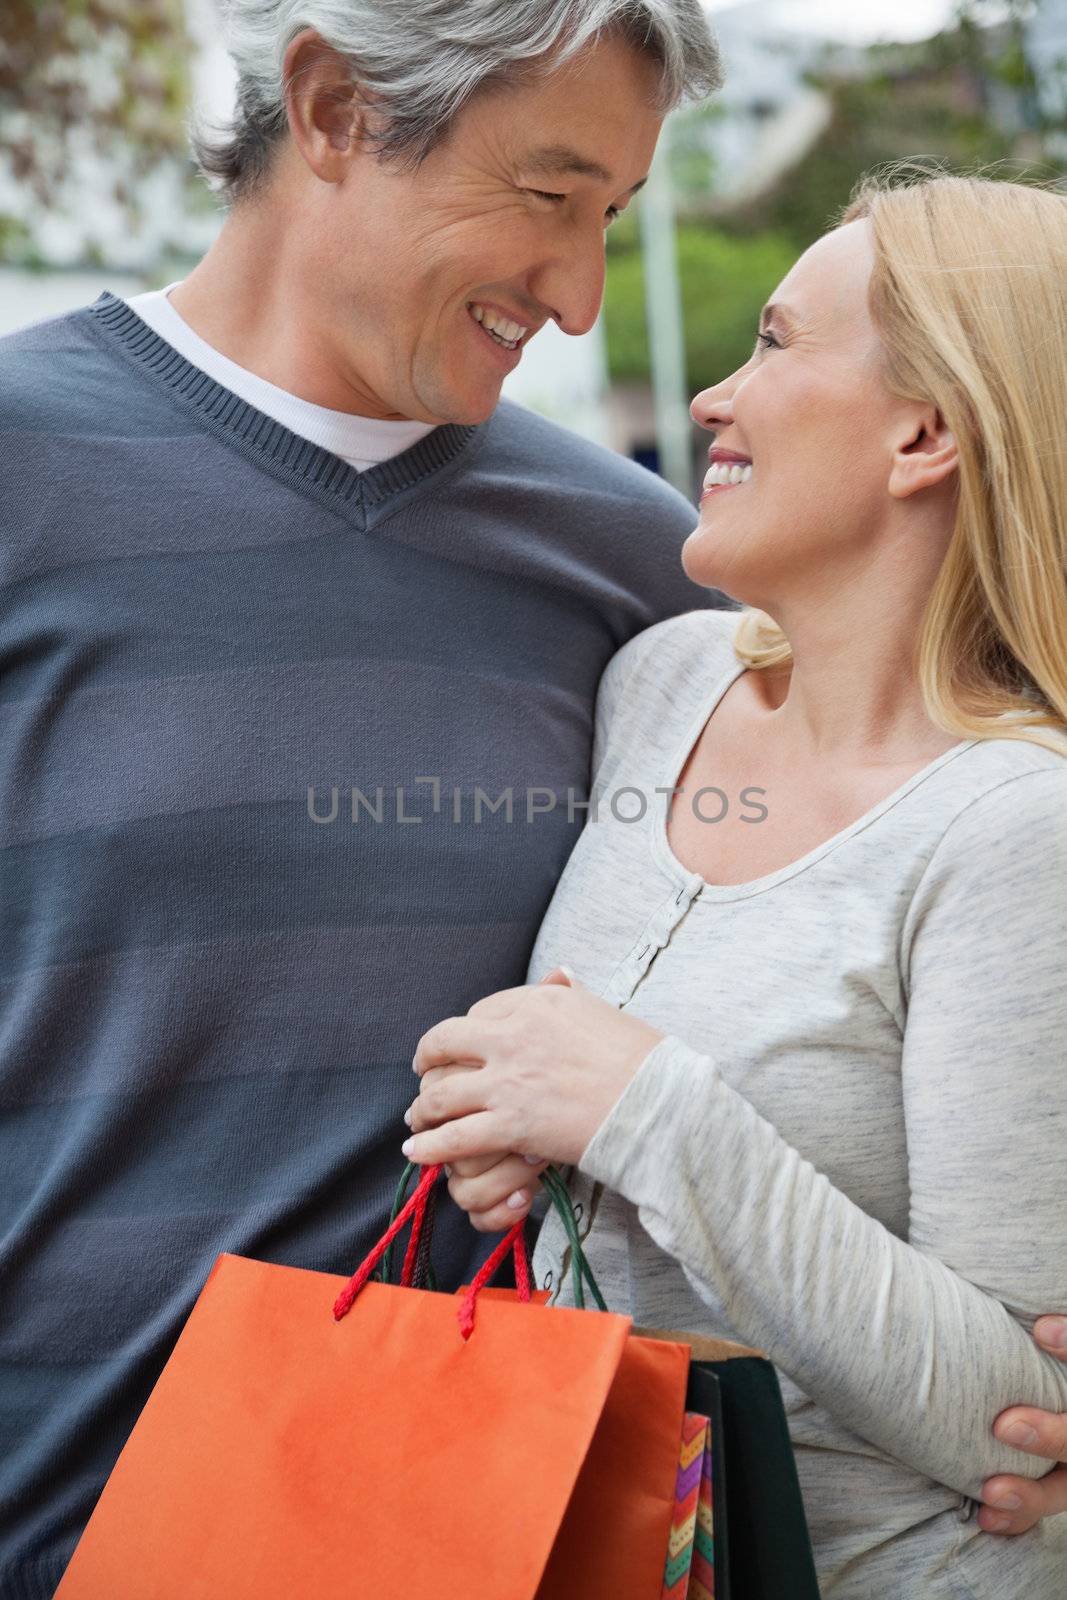 Happy couple looking at each other as woman holding shopping bags